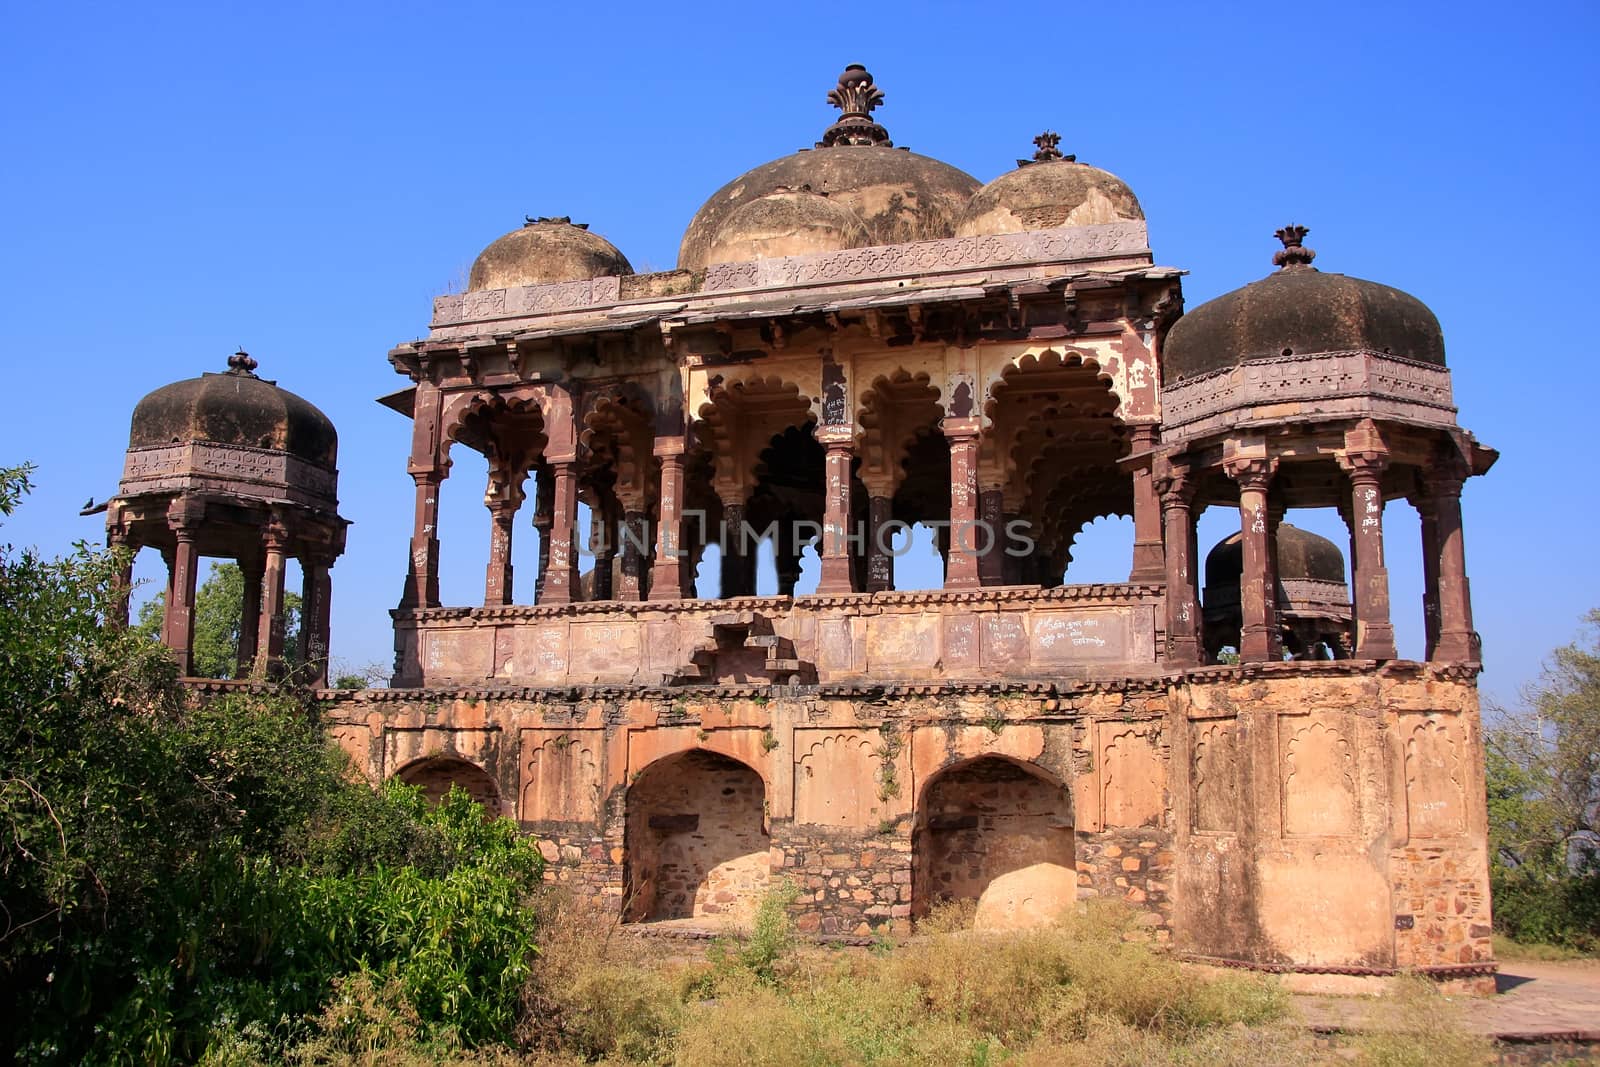 Arched temple at Ranthambore Fort, Rajasthan, India